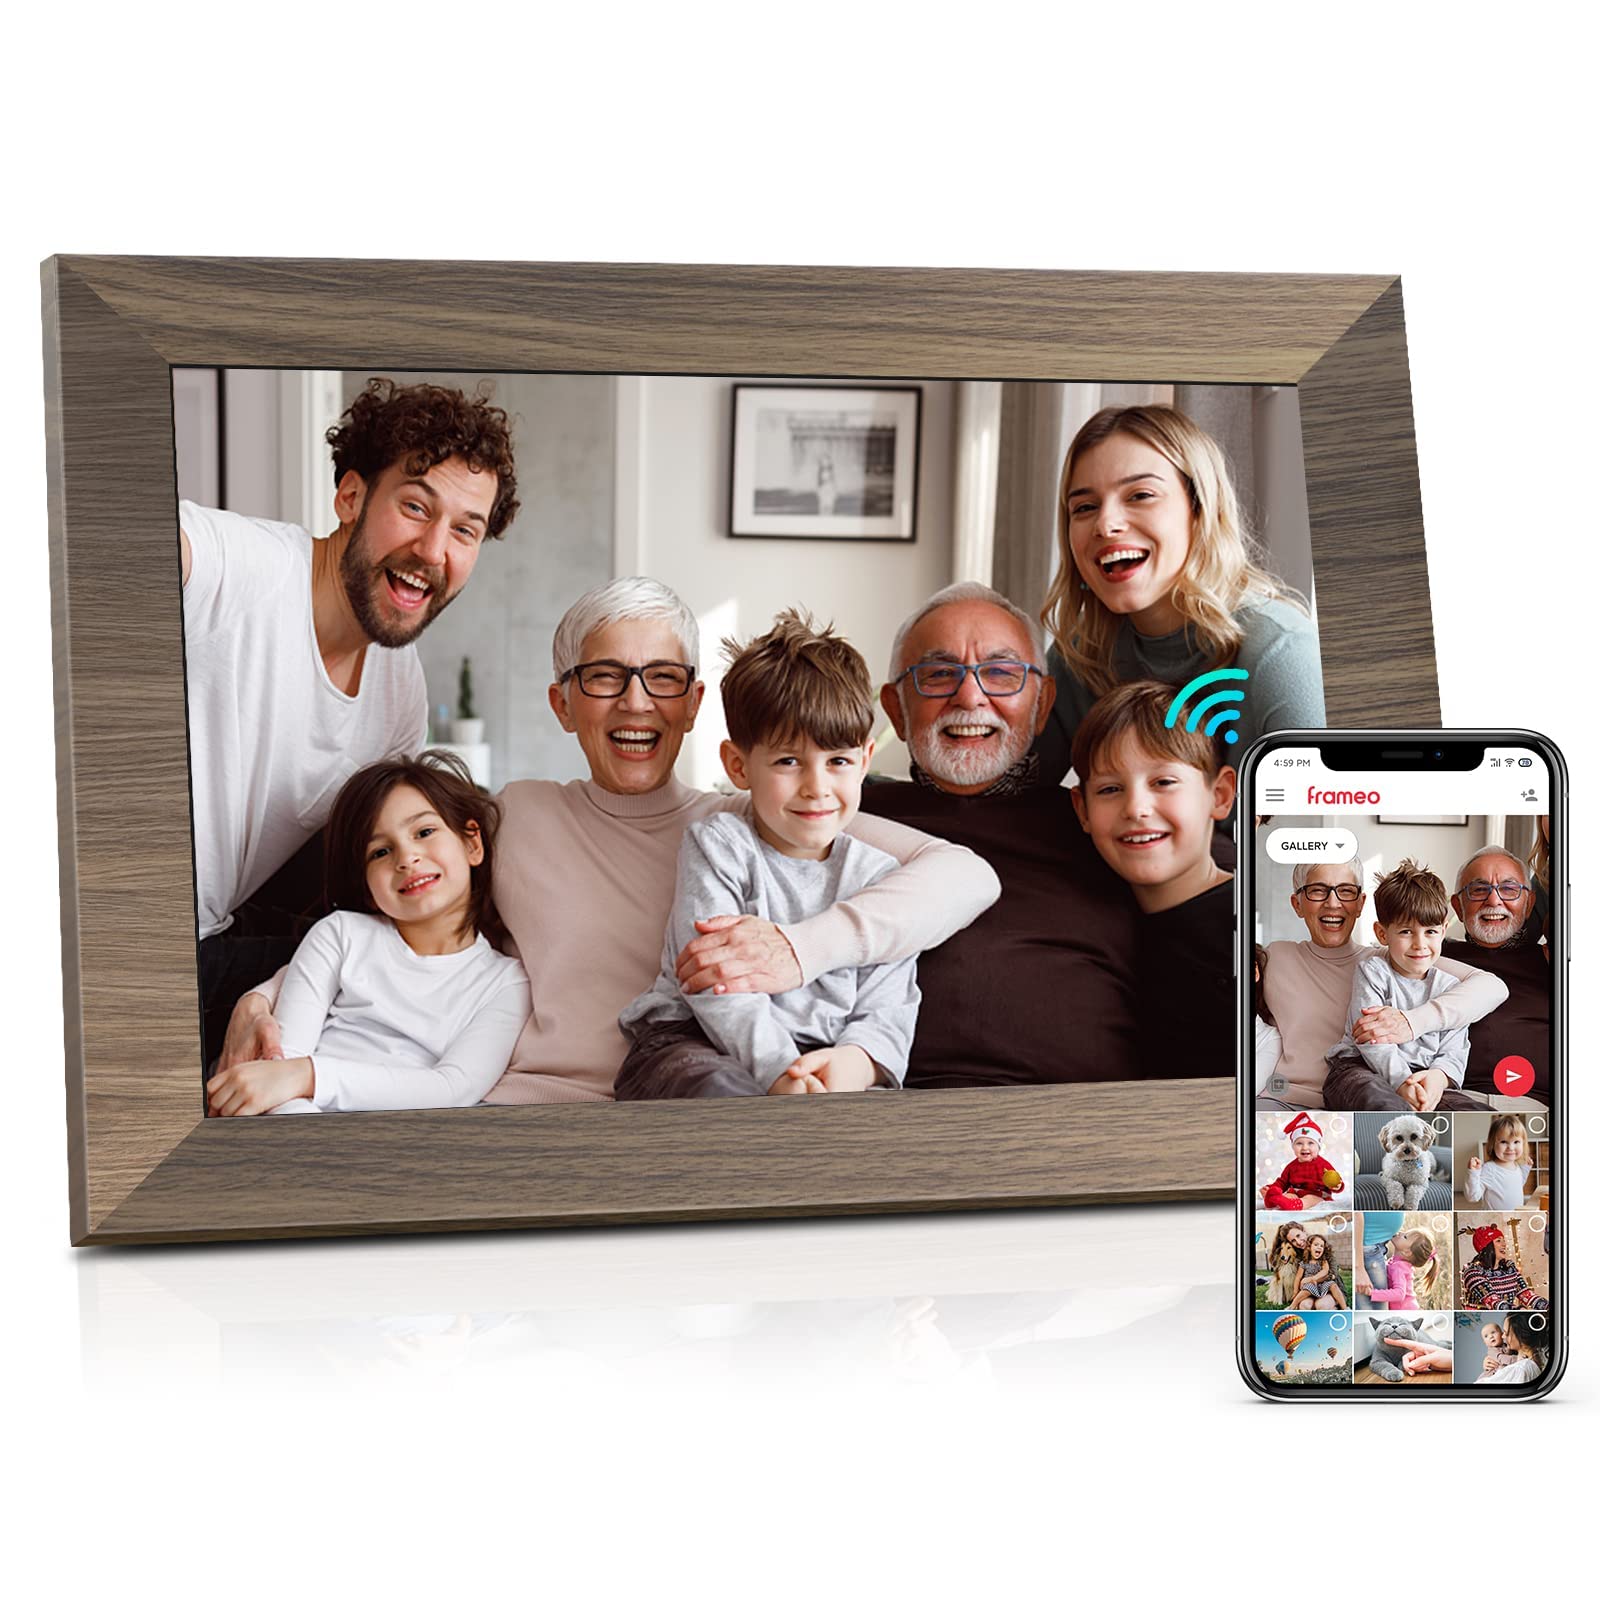 Canupdog 10.1 WiFi Digital Photo Frame, Canupdog IPS Touch Screen Smart Cloud Photo Frame with 16GB Storage, Wall Mountable, Auto-Rotate,